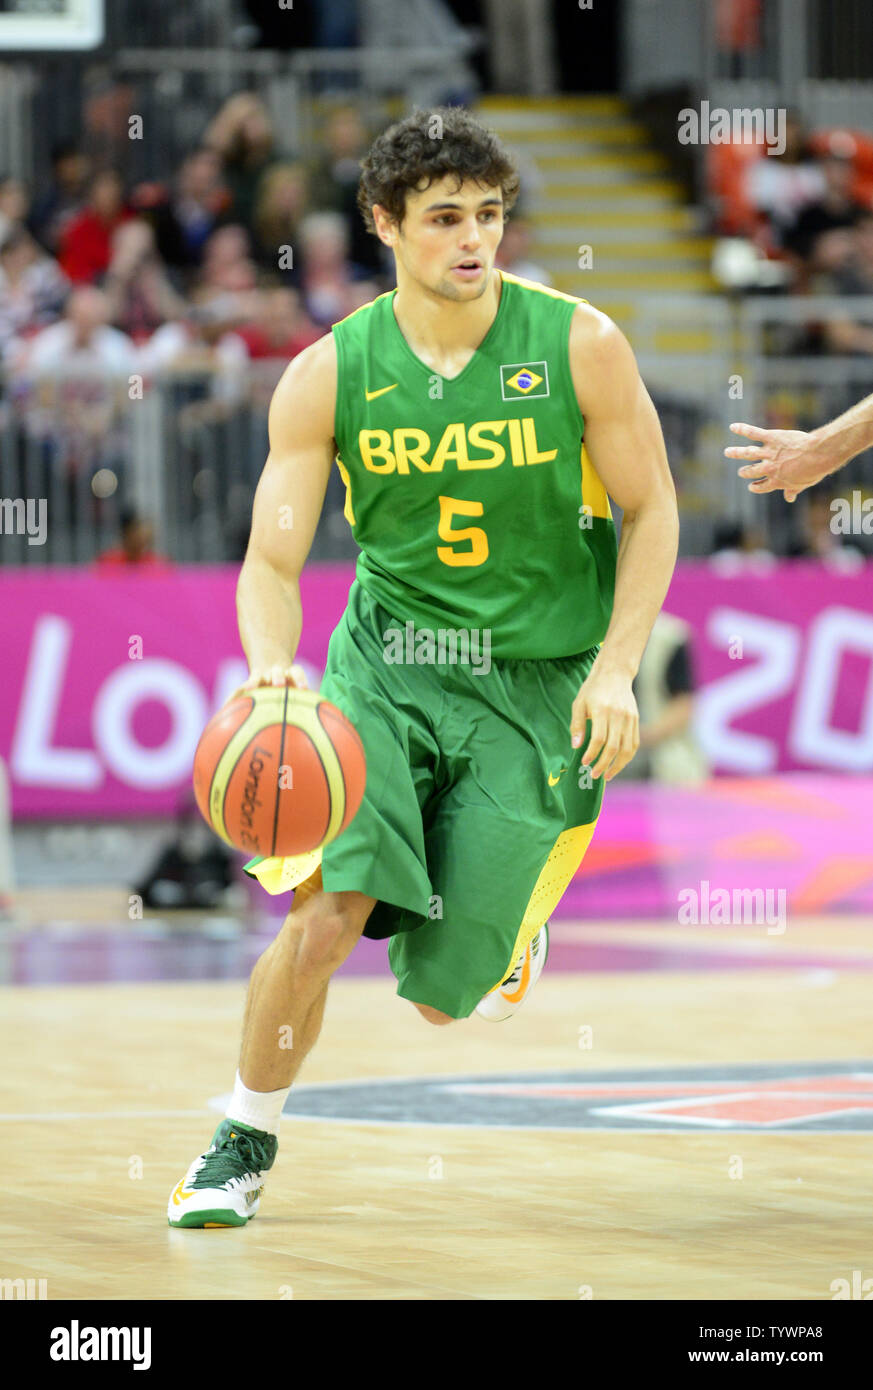 Raul Neto (5) of Brazil dribbles the ball in the first half of the Great Britain v. Brazil preliminary round - group B basketball game at the London 2012 Summer Olympics on July 31, 2012 in London.   UPI/Ron Sachs Stock Photo